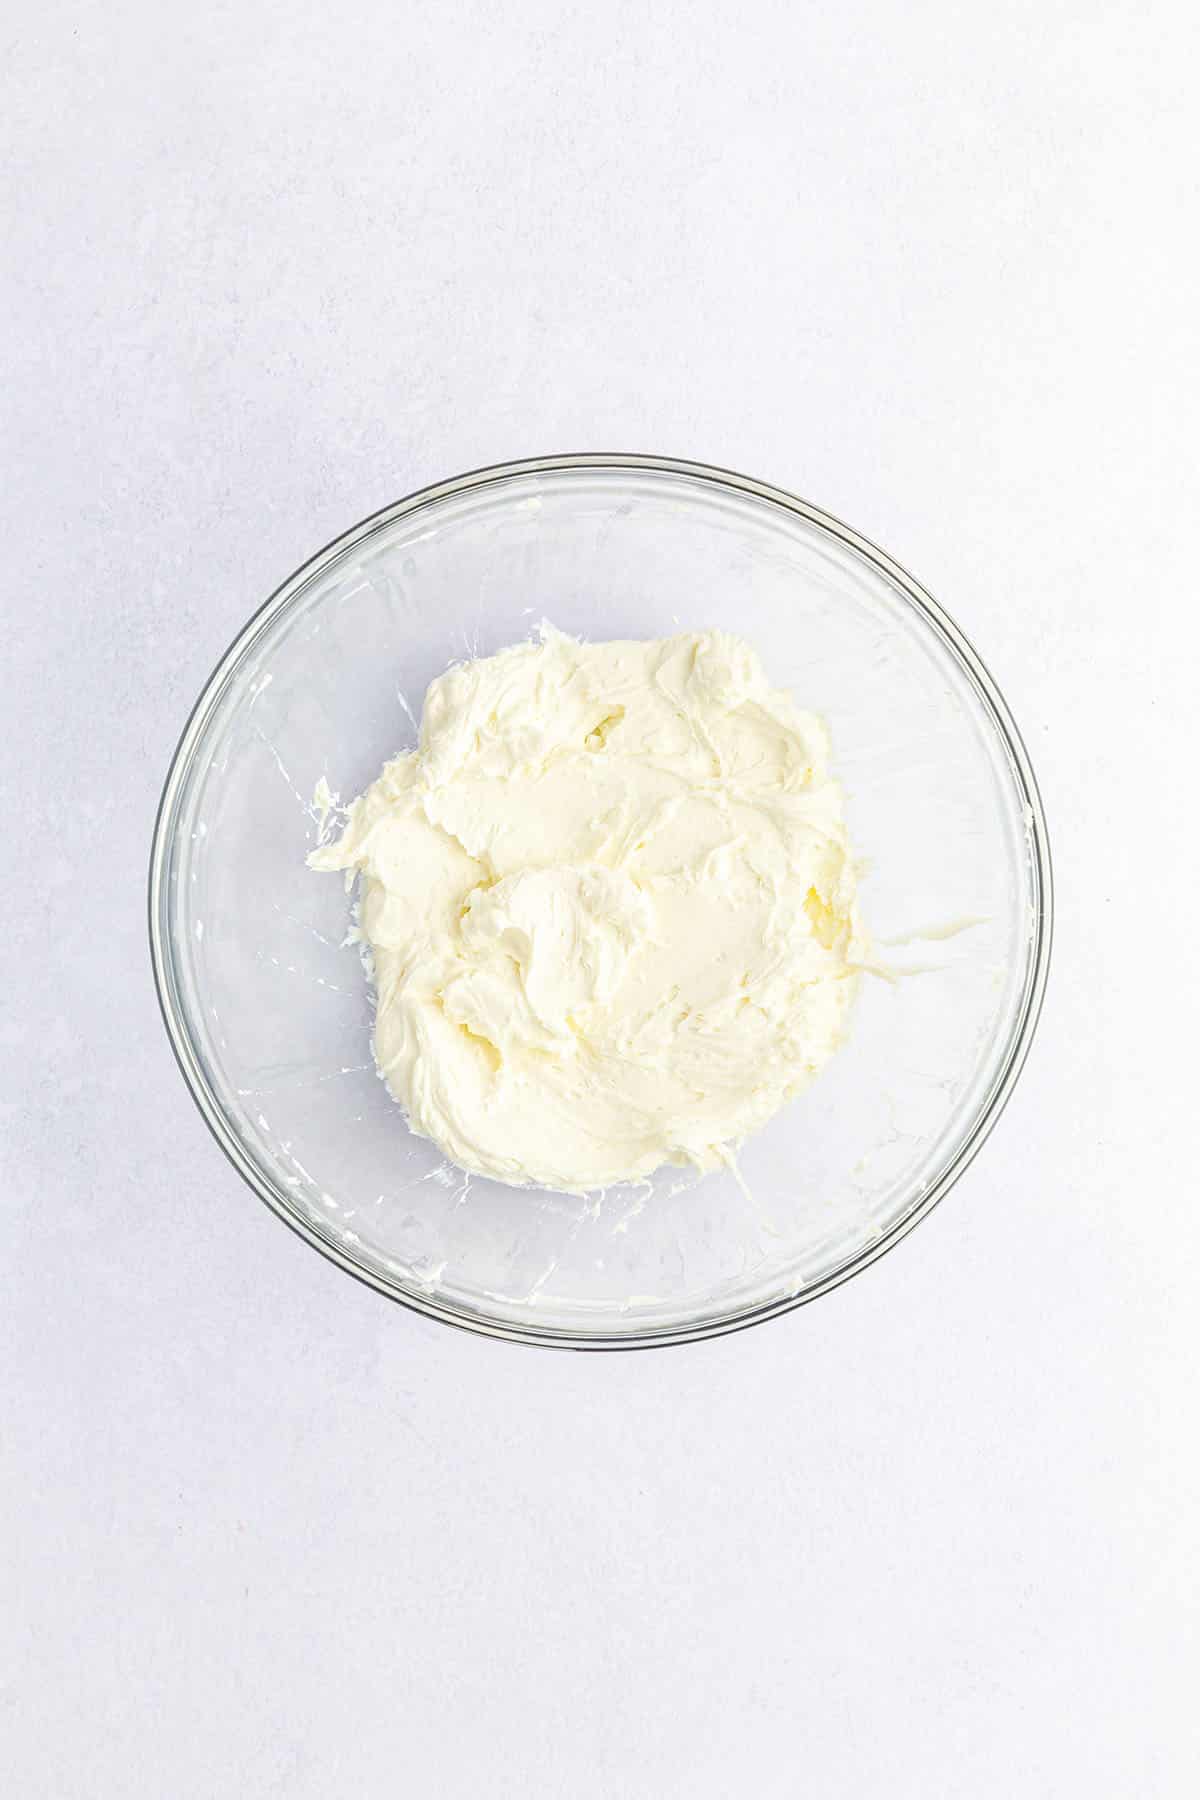 Softly whipped cream cheese in a glass bowl